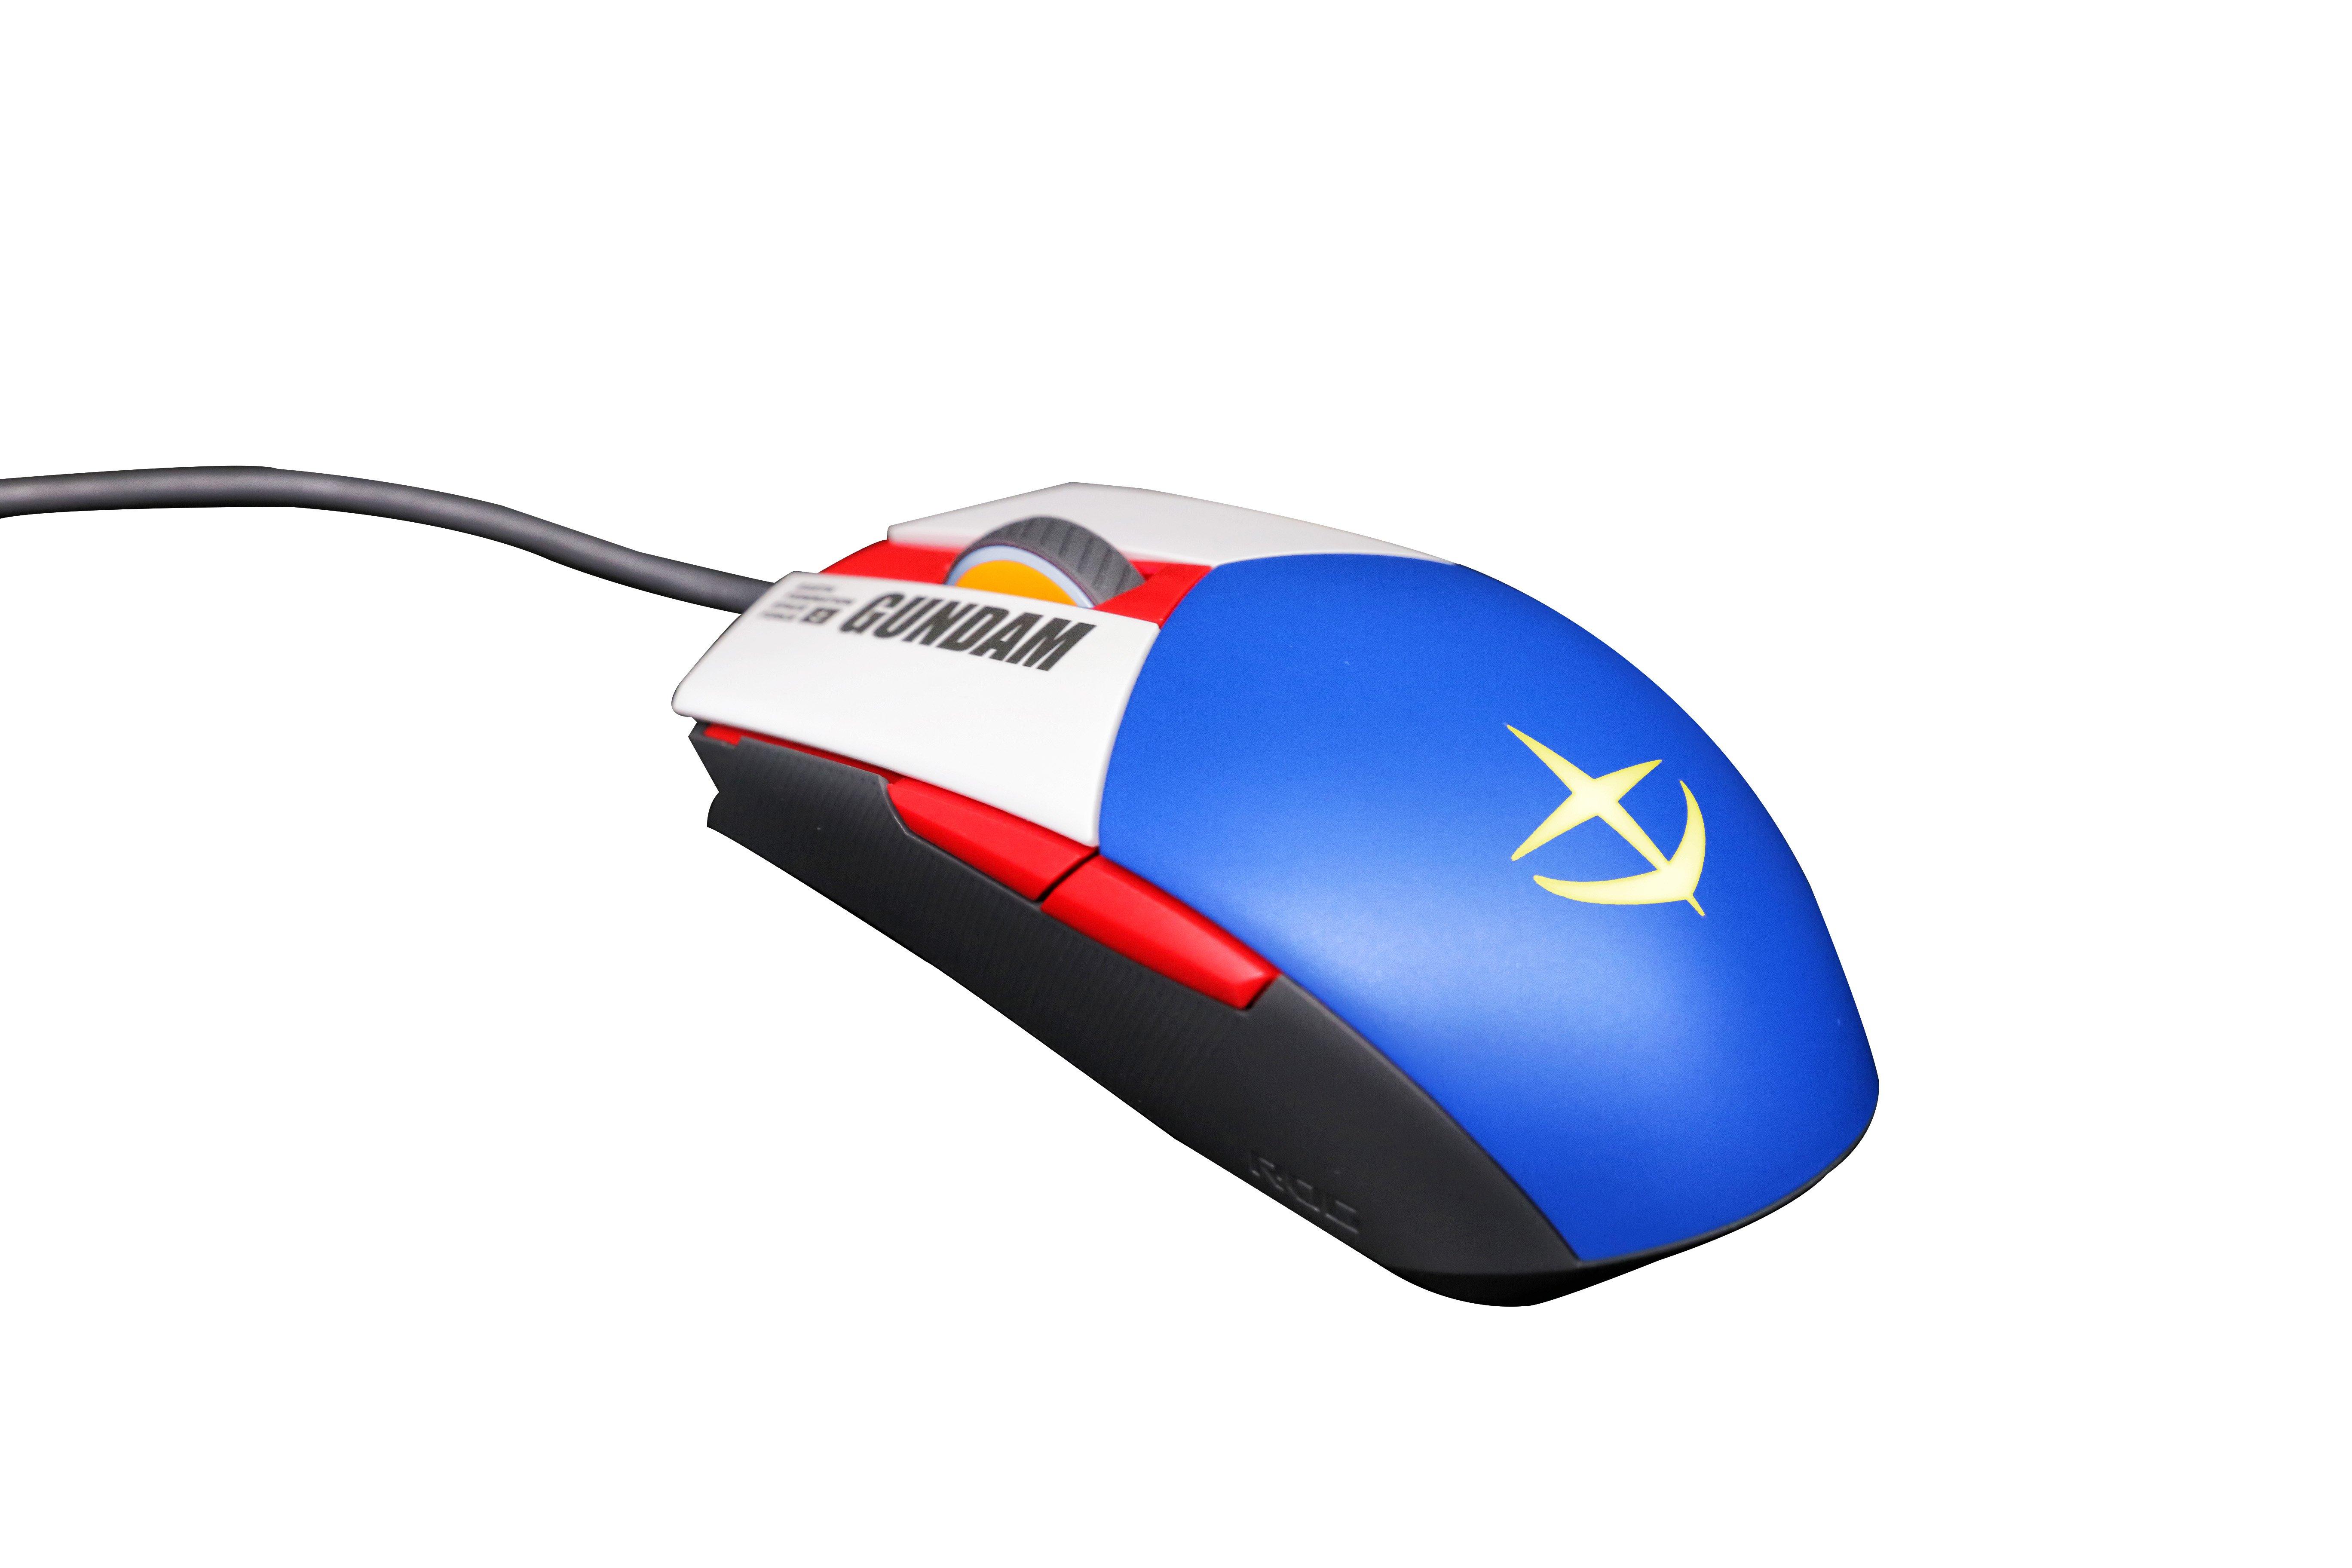 list item 9 of 14 ASUS ROG Strix Impact II GUNDAM EDITION Wired Gaming Mouse